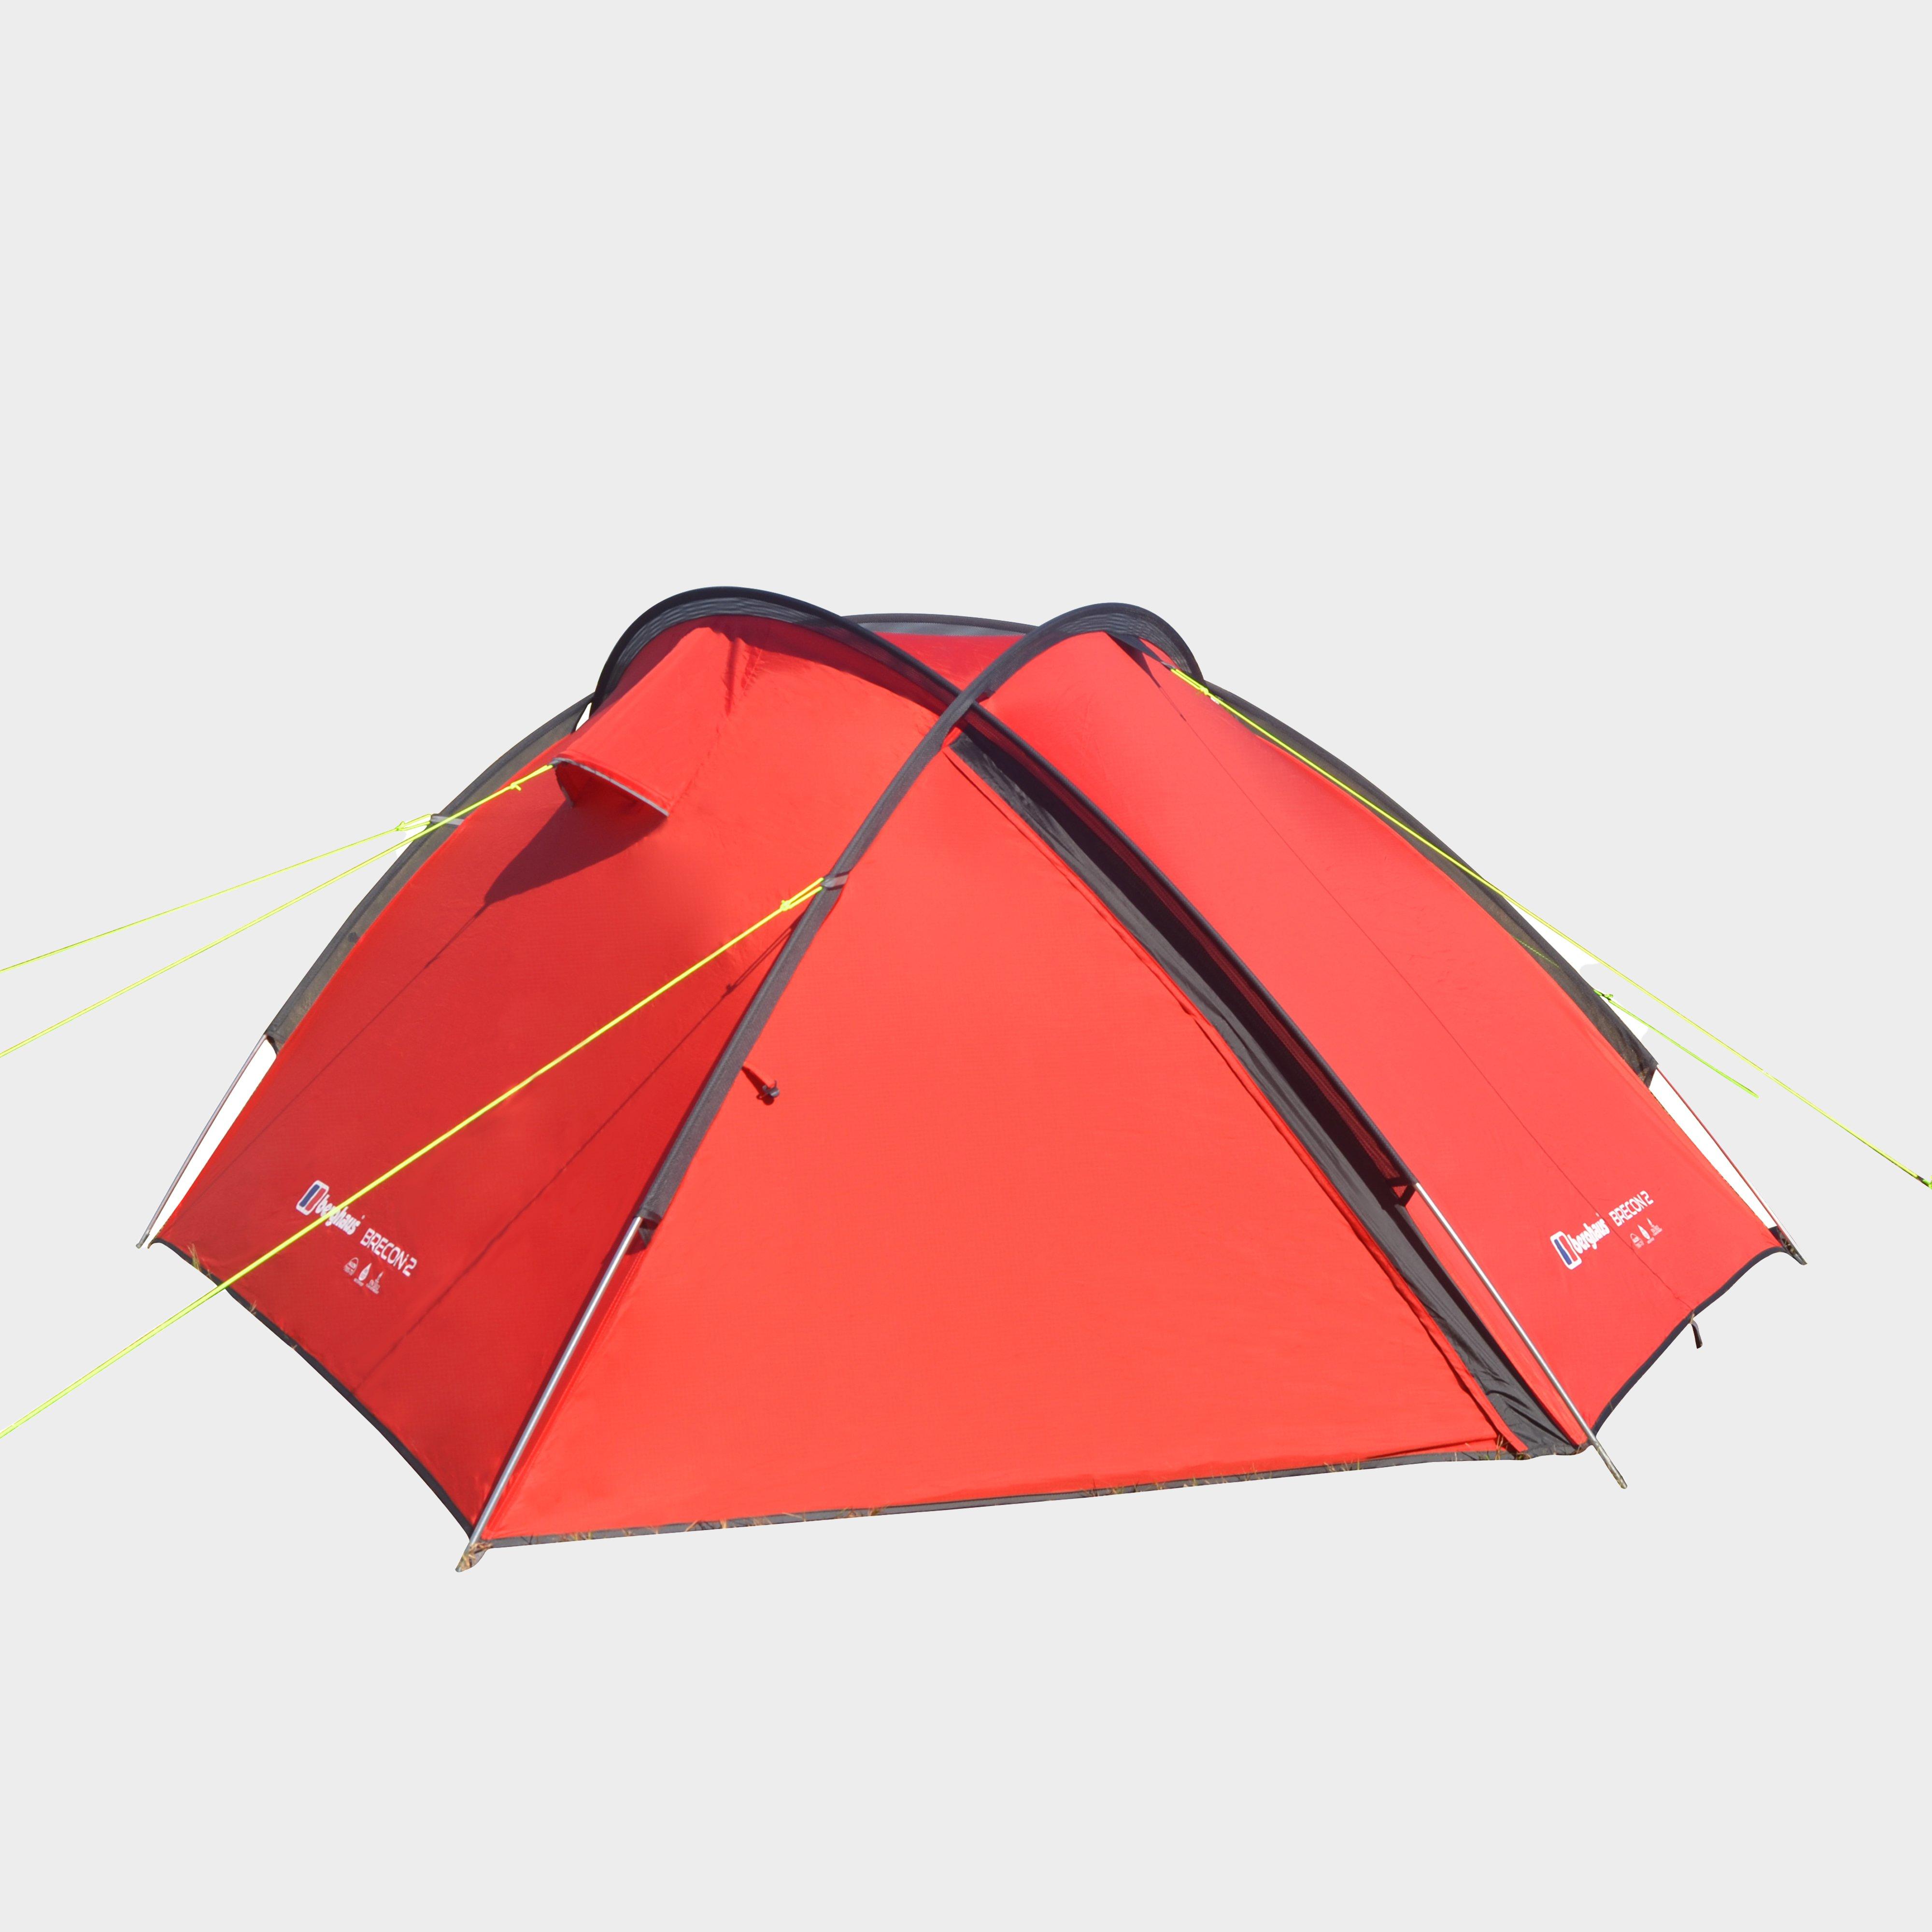 Berghaus Berghaus Brecon 2 Tent - Red, RED